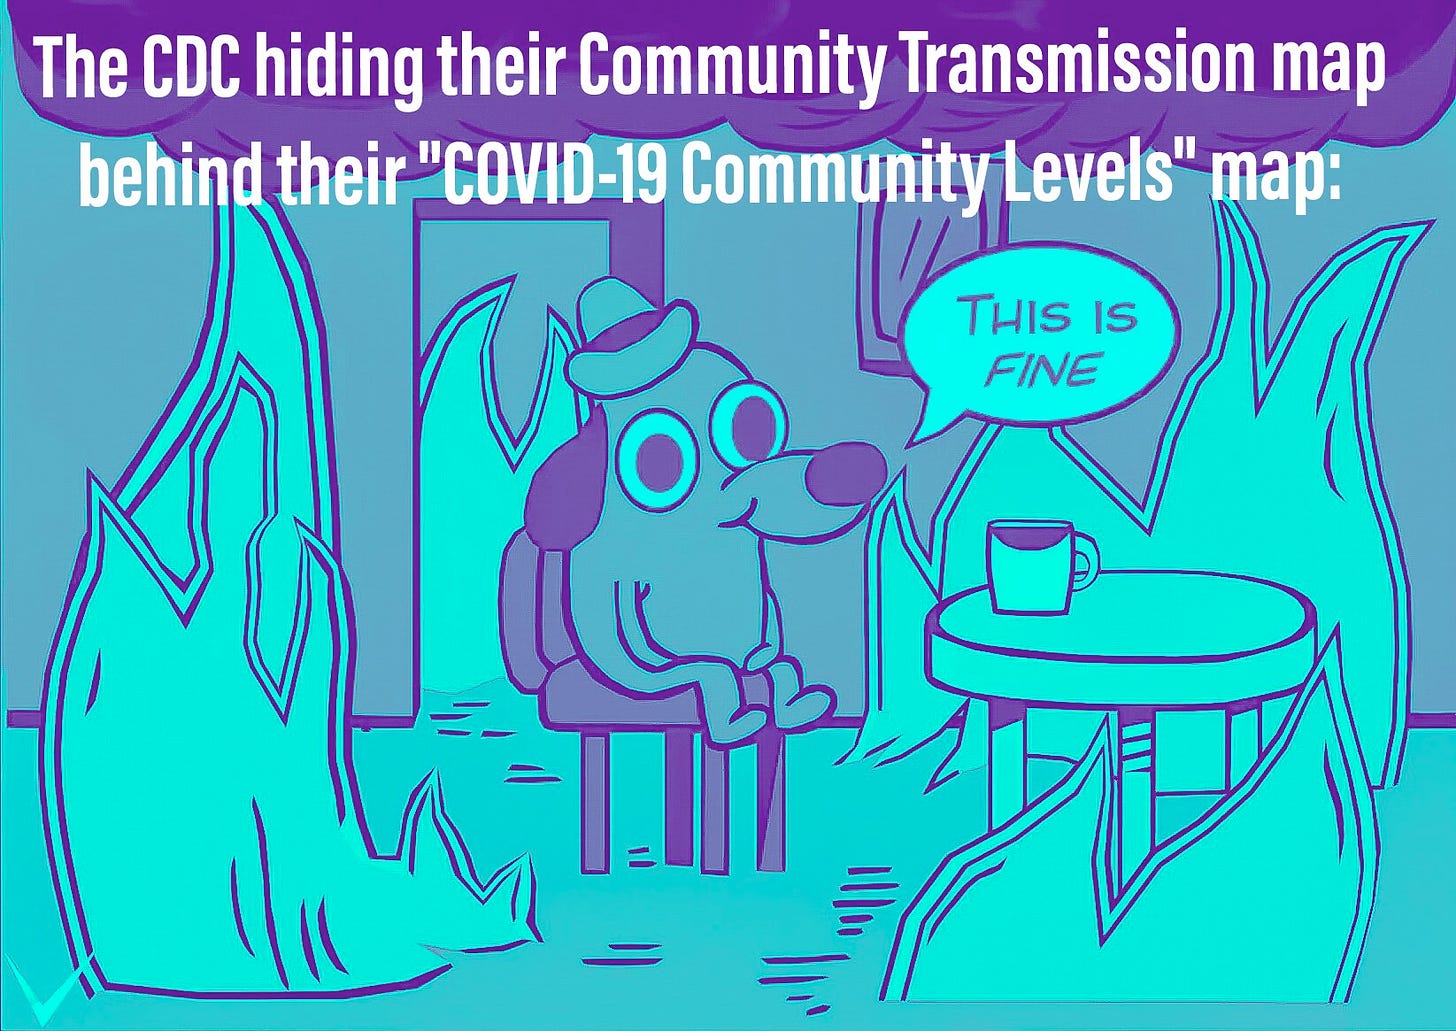  This is fine dog meme overlaid with soothing teal green & labeled with the caption The CDC hiding their Community Transmission map behind their COVID-19 Community Levels map